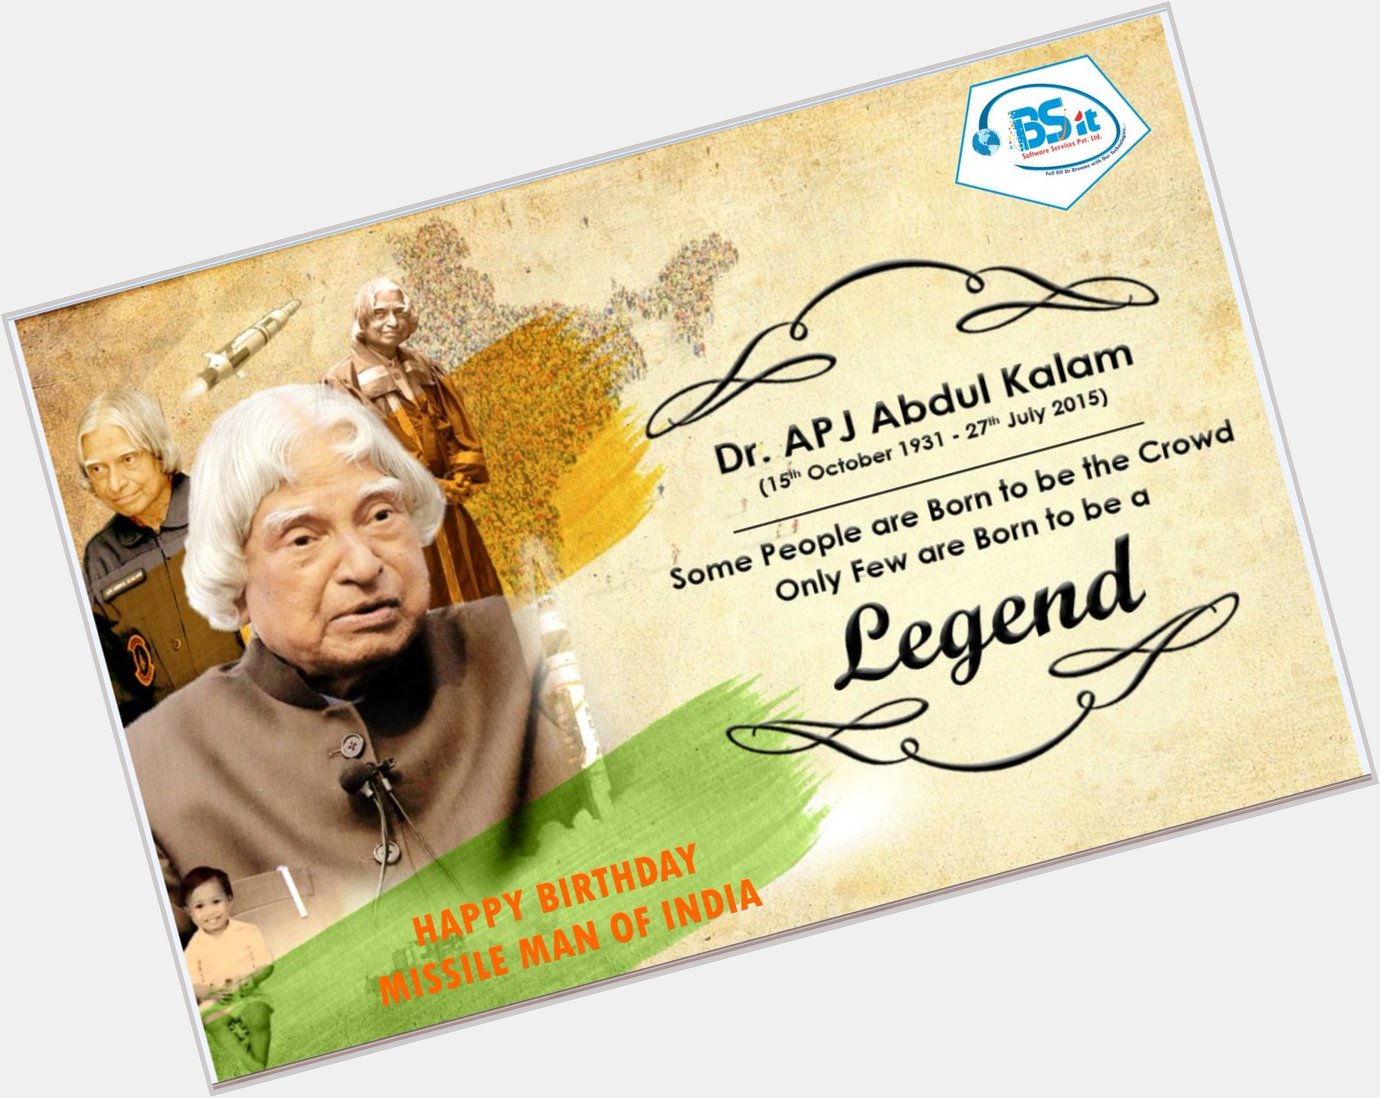 Happy birthday Dr.A.P.J. Abdul Kalam sir Missile Man A great inspiration 